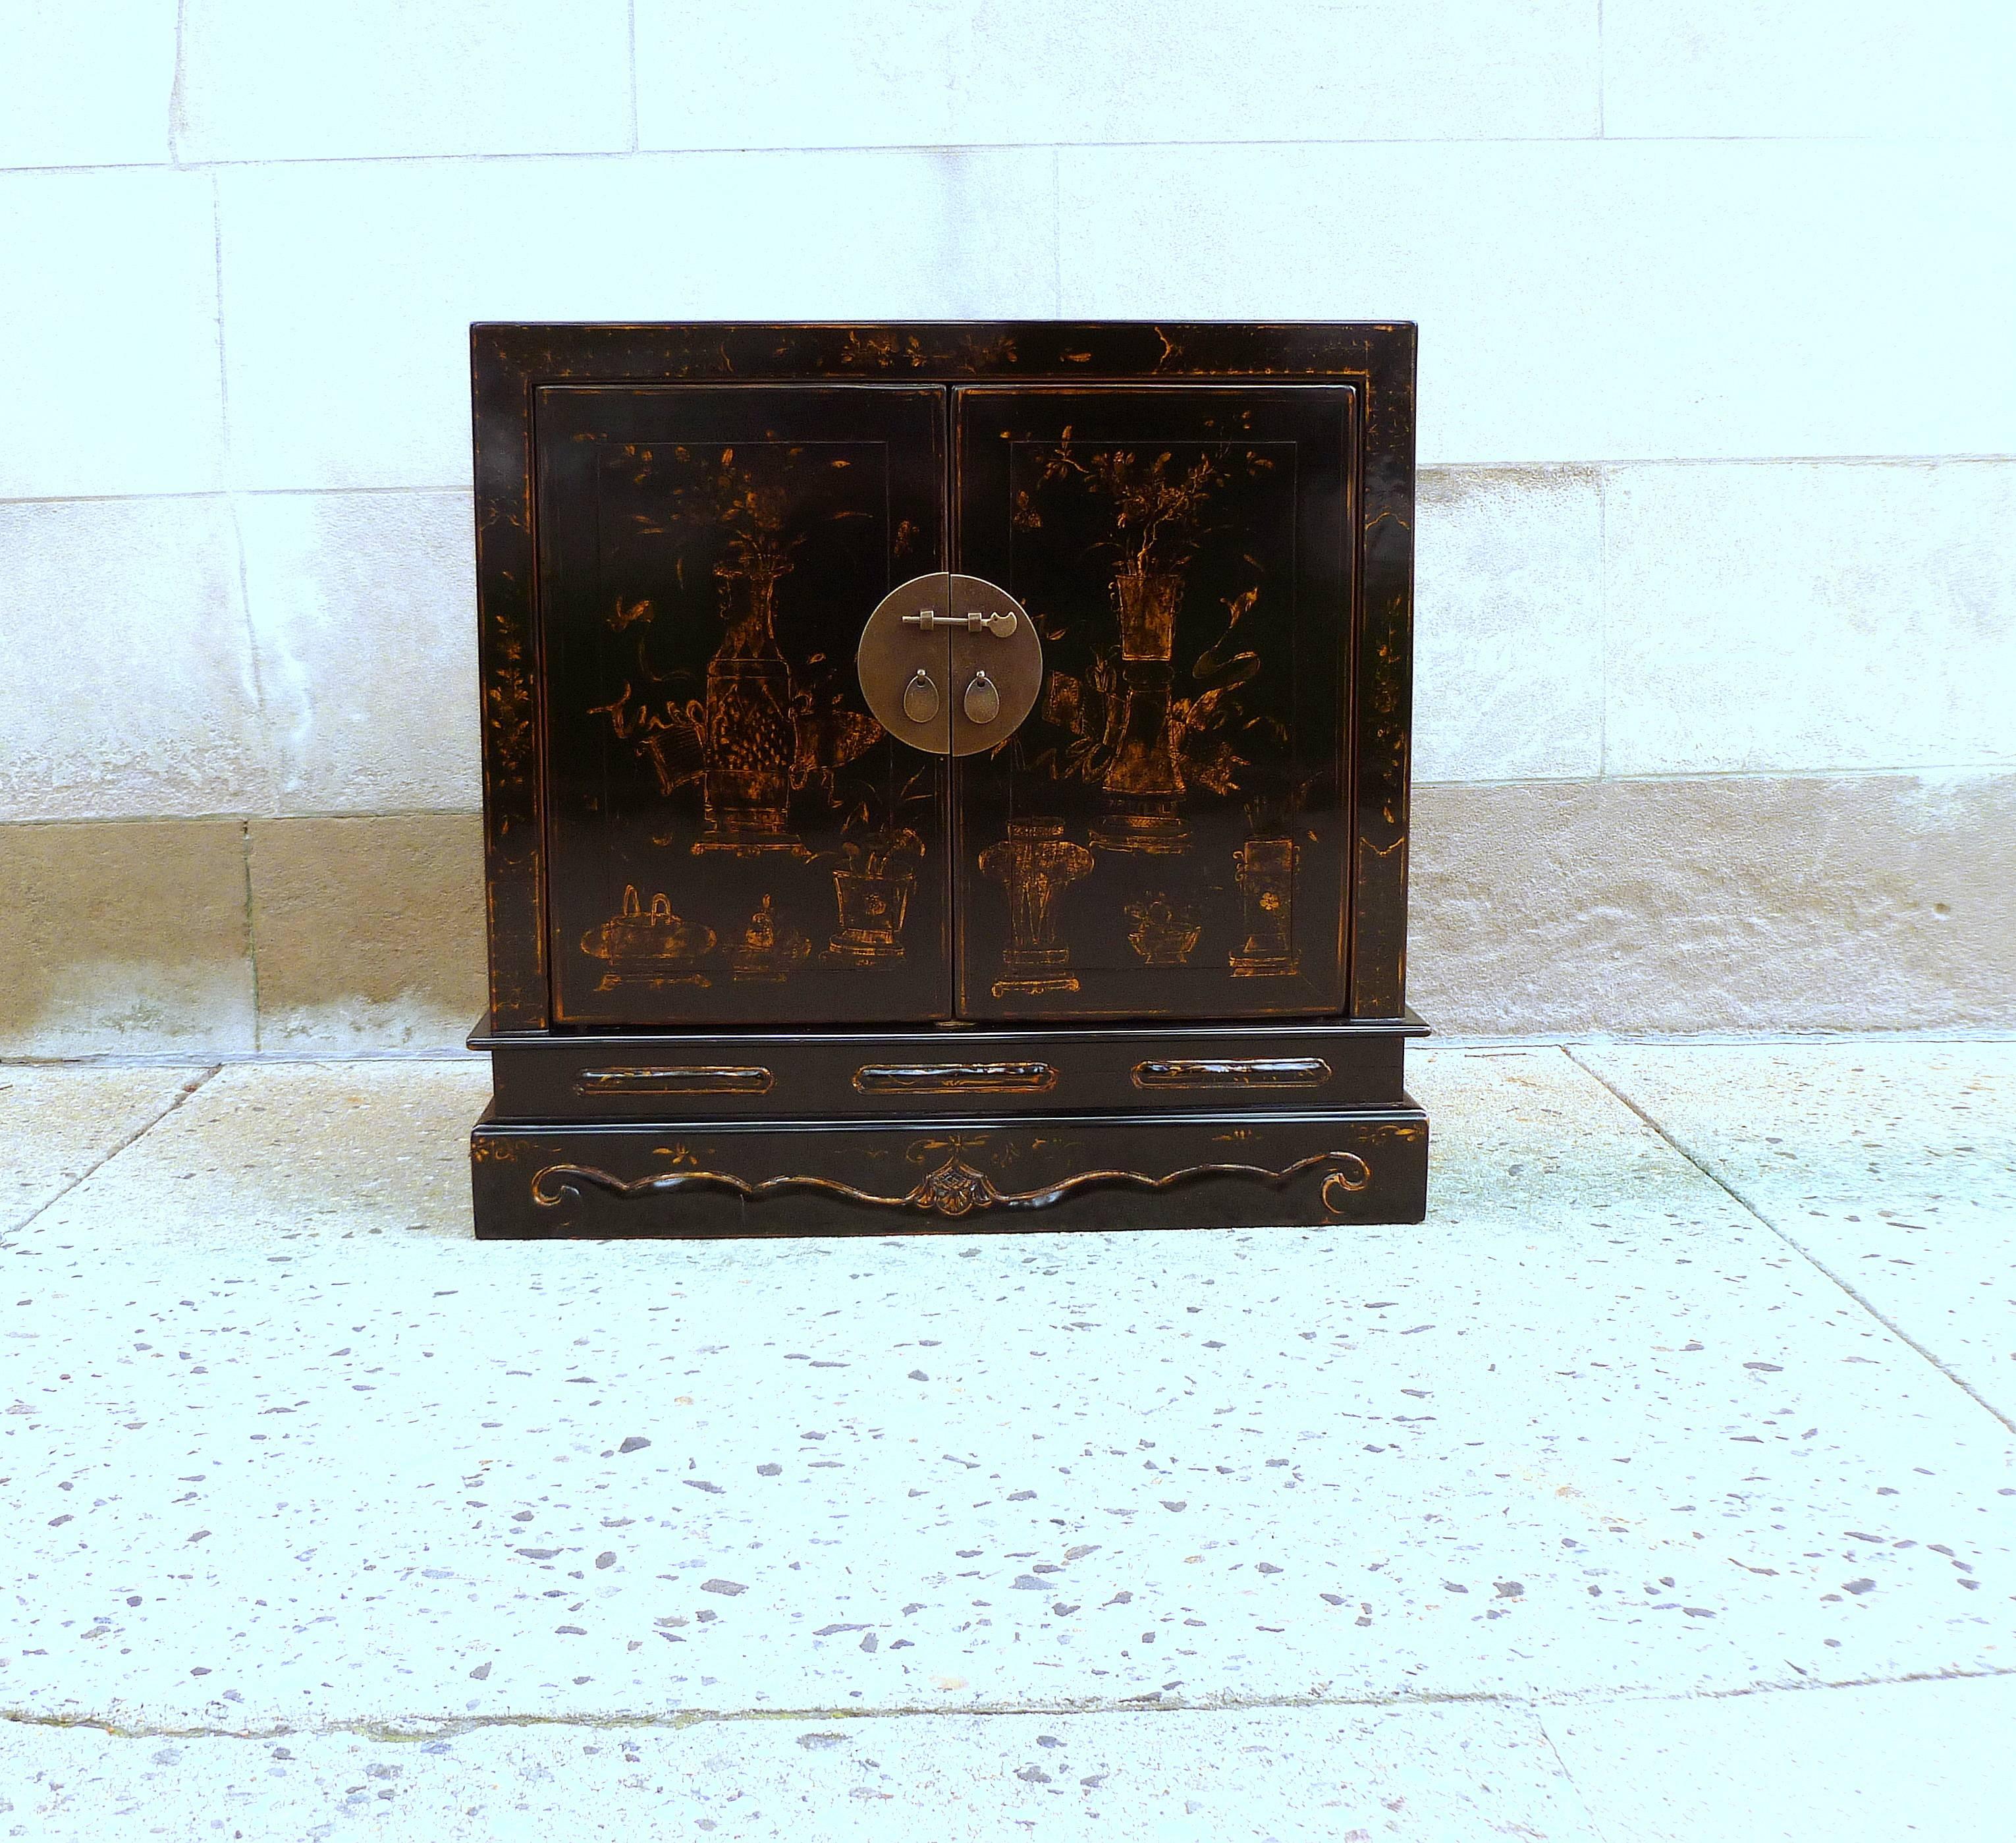 Fine black lacquer chest with gilt motif. Beautiful form and color, elegant piece.